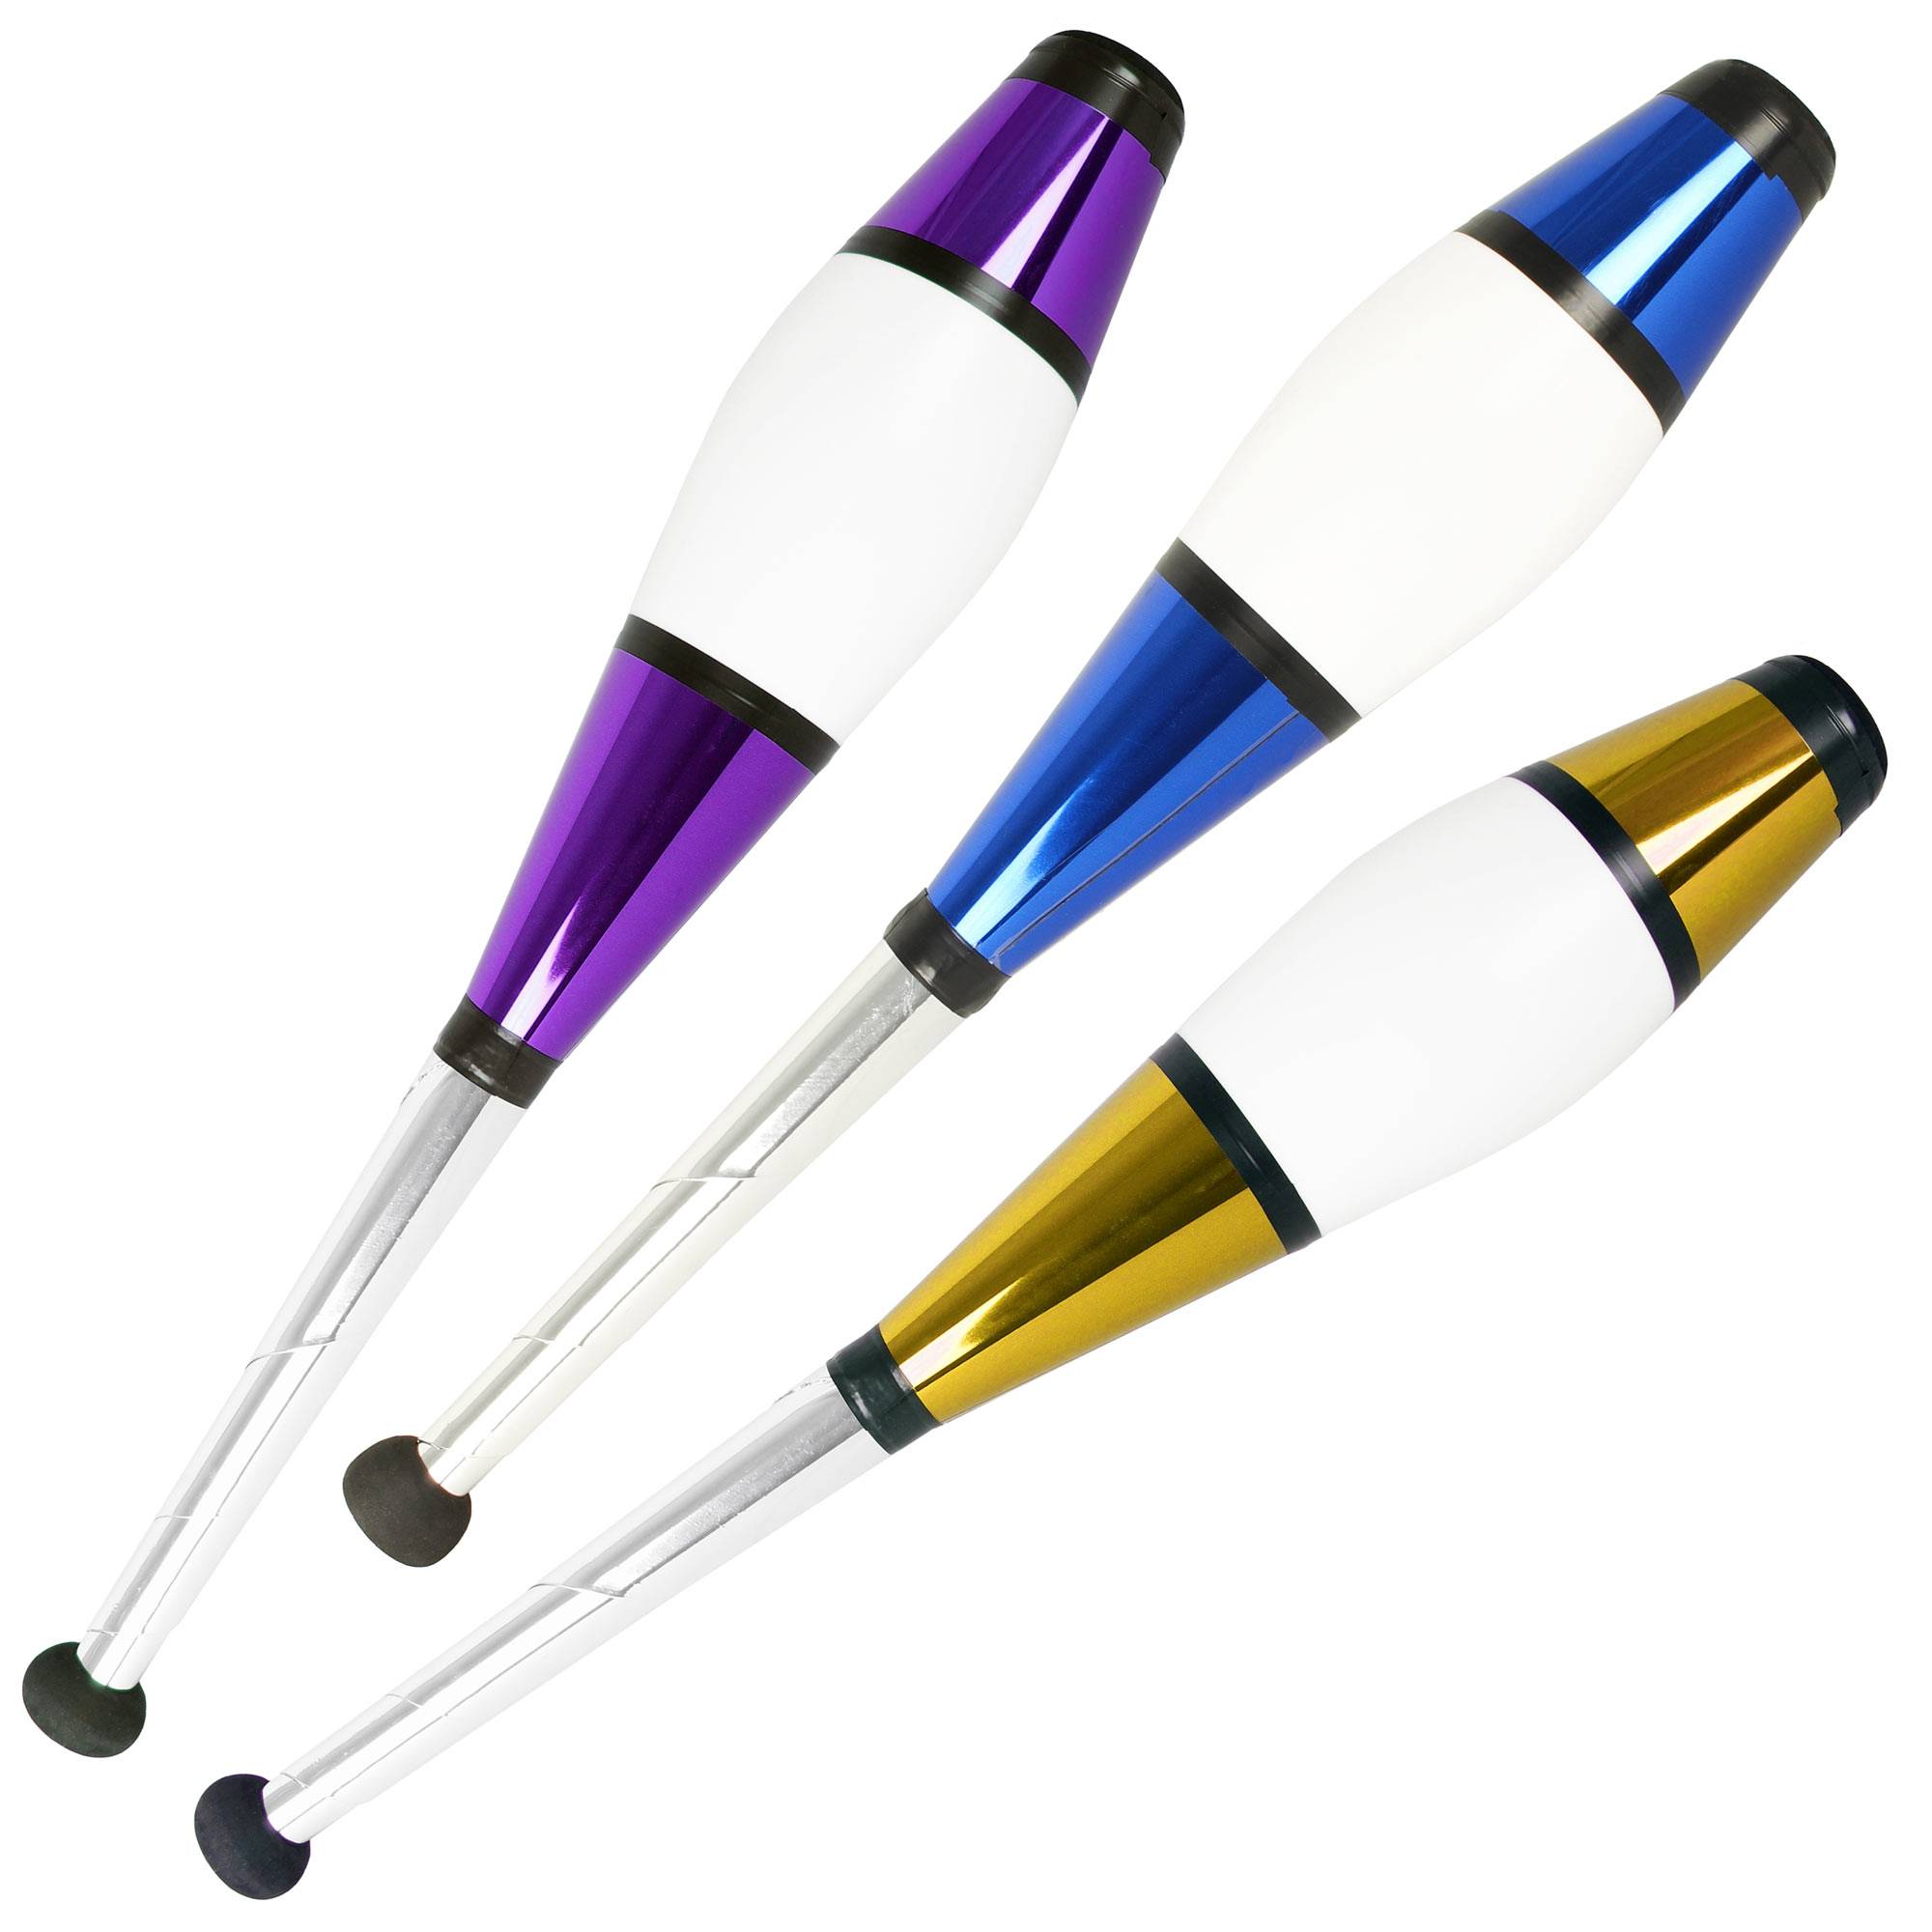 Purple, blue and gold euro juggling clubs